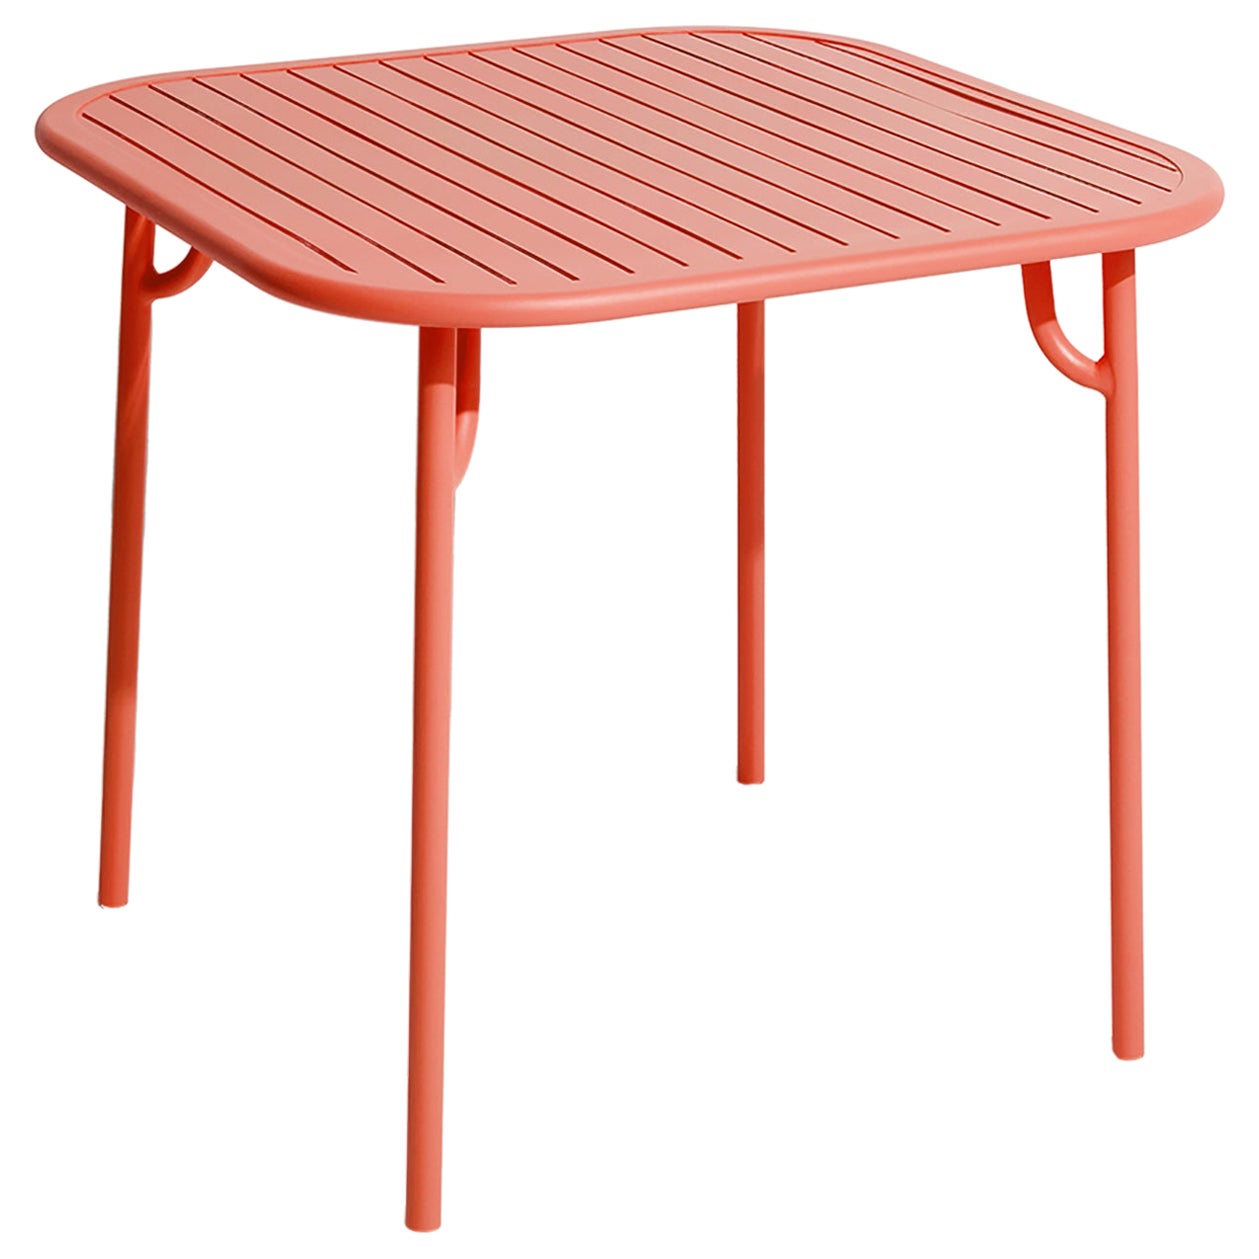 Petite Friture Week-End Square Dining Table in Coral Aluminium with Slats For Sale